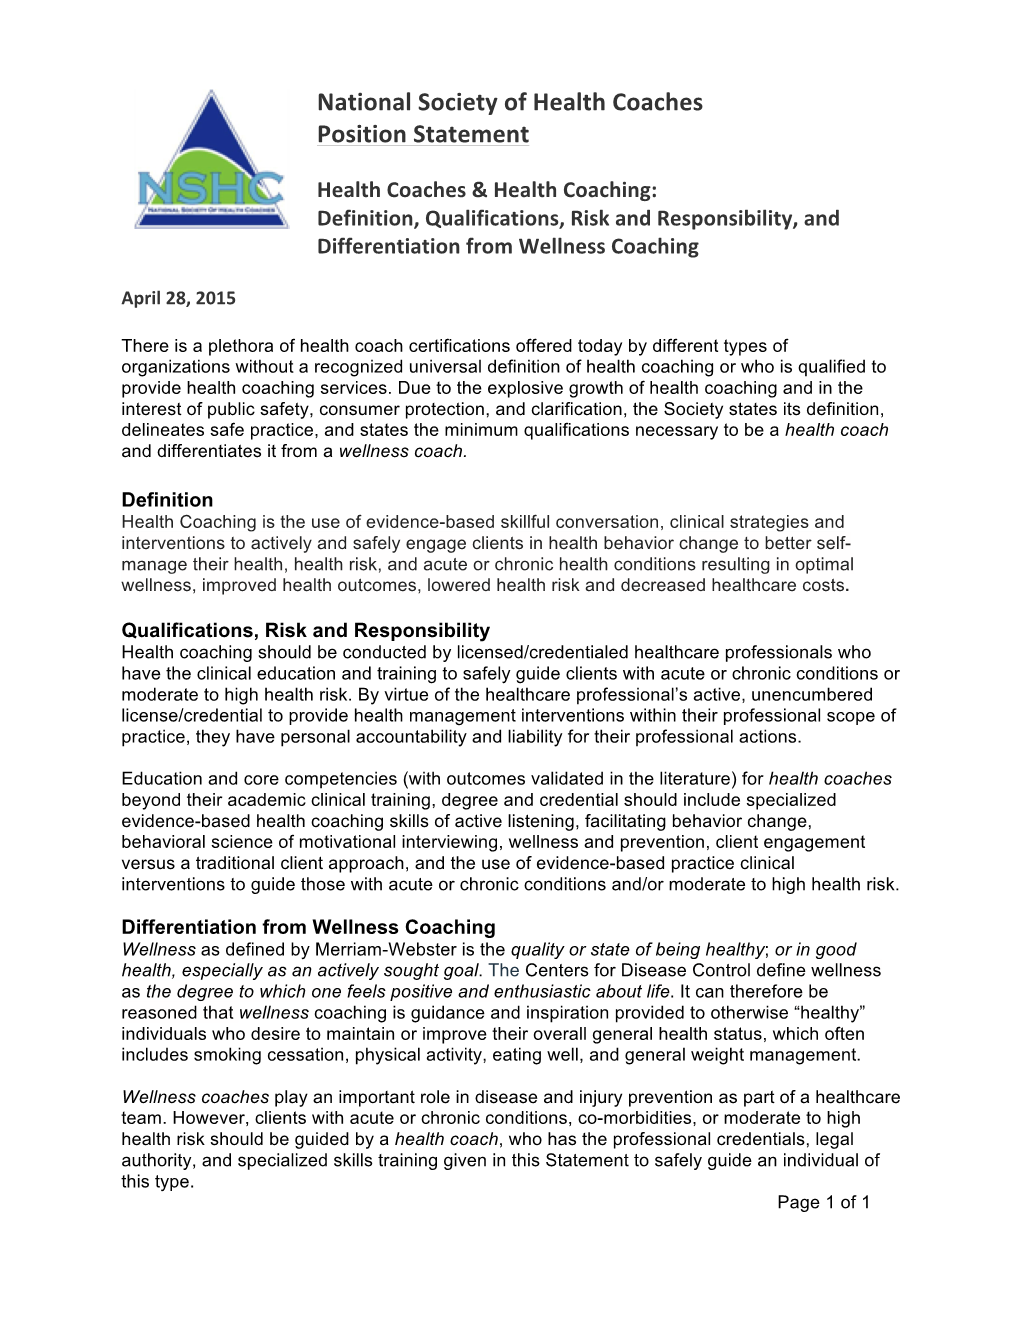 National Society of Health Coaches Position Statement